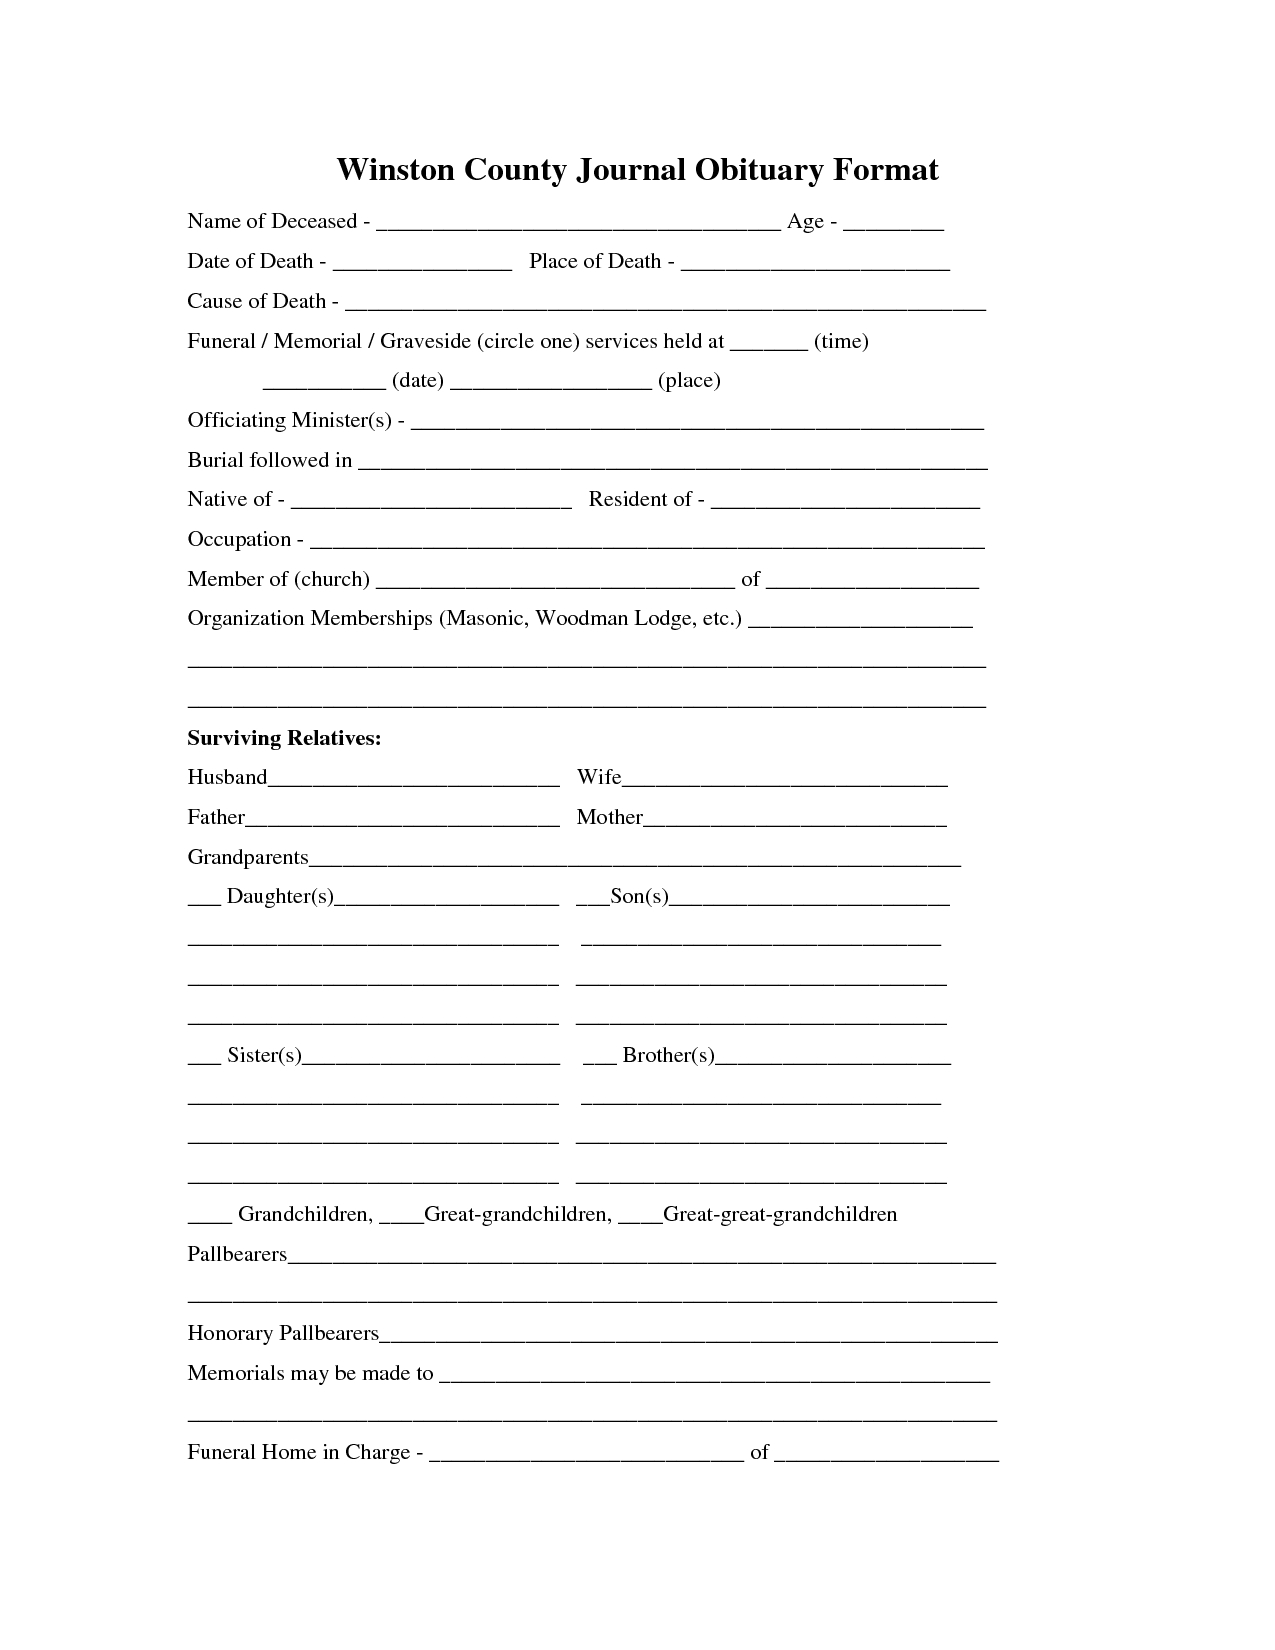 Printable Obituary Template | Fill In The Blank Obituary For Fill In The Blank Obituary Template